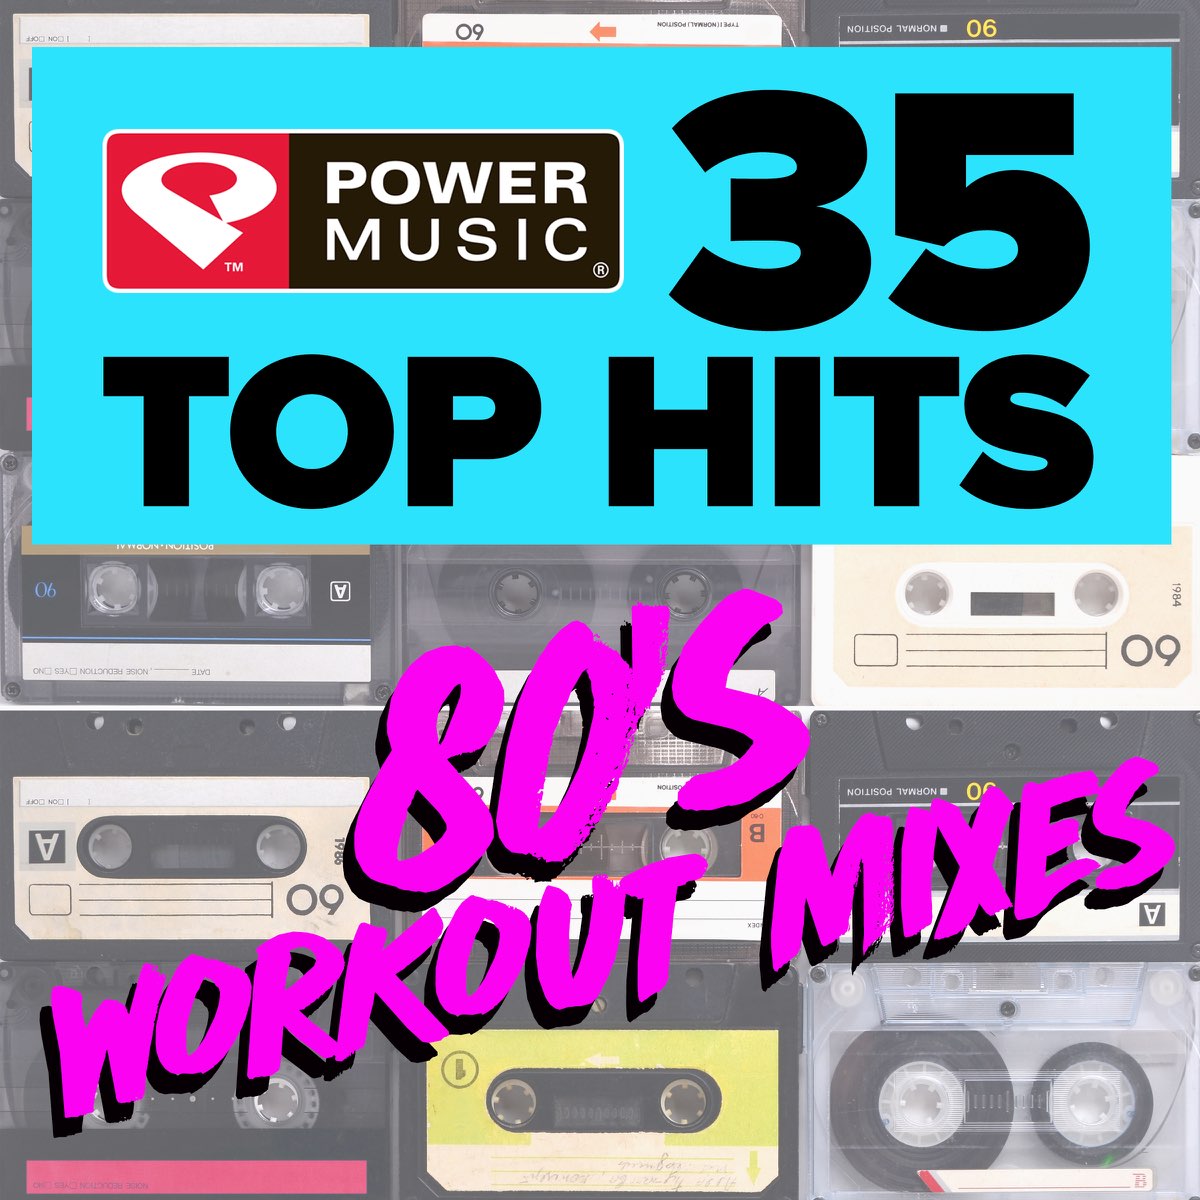 ‎35 Top Hits 80s Workout Mixes Unmixed Workout Music Ideal For Gym Jogging Running 